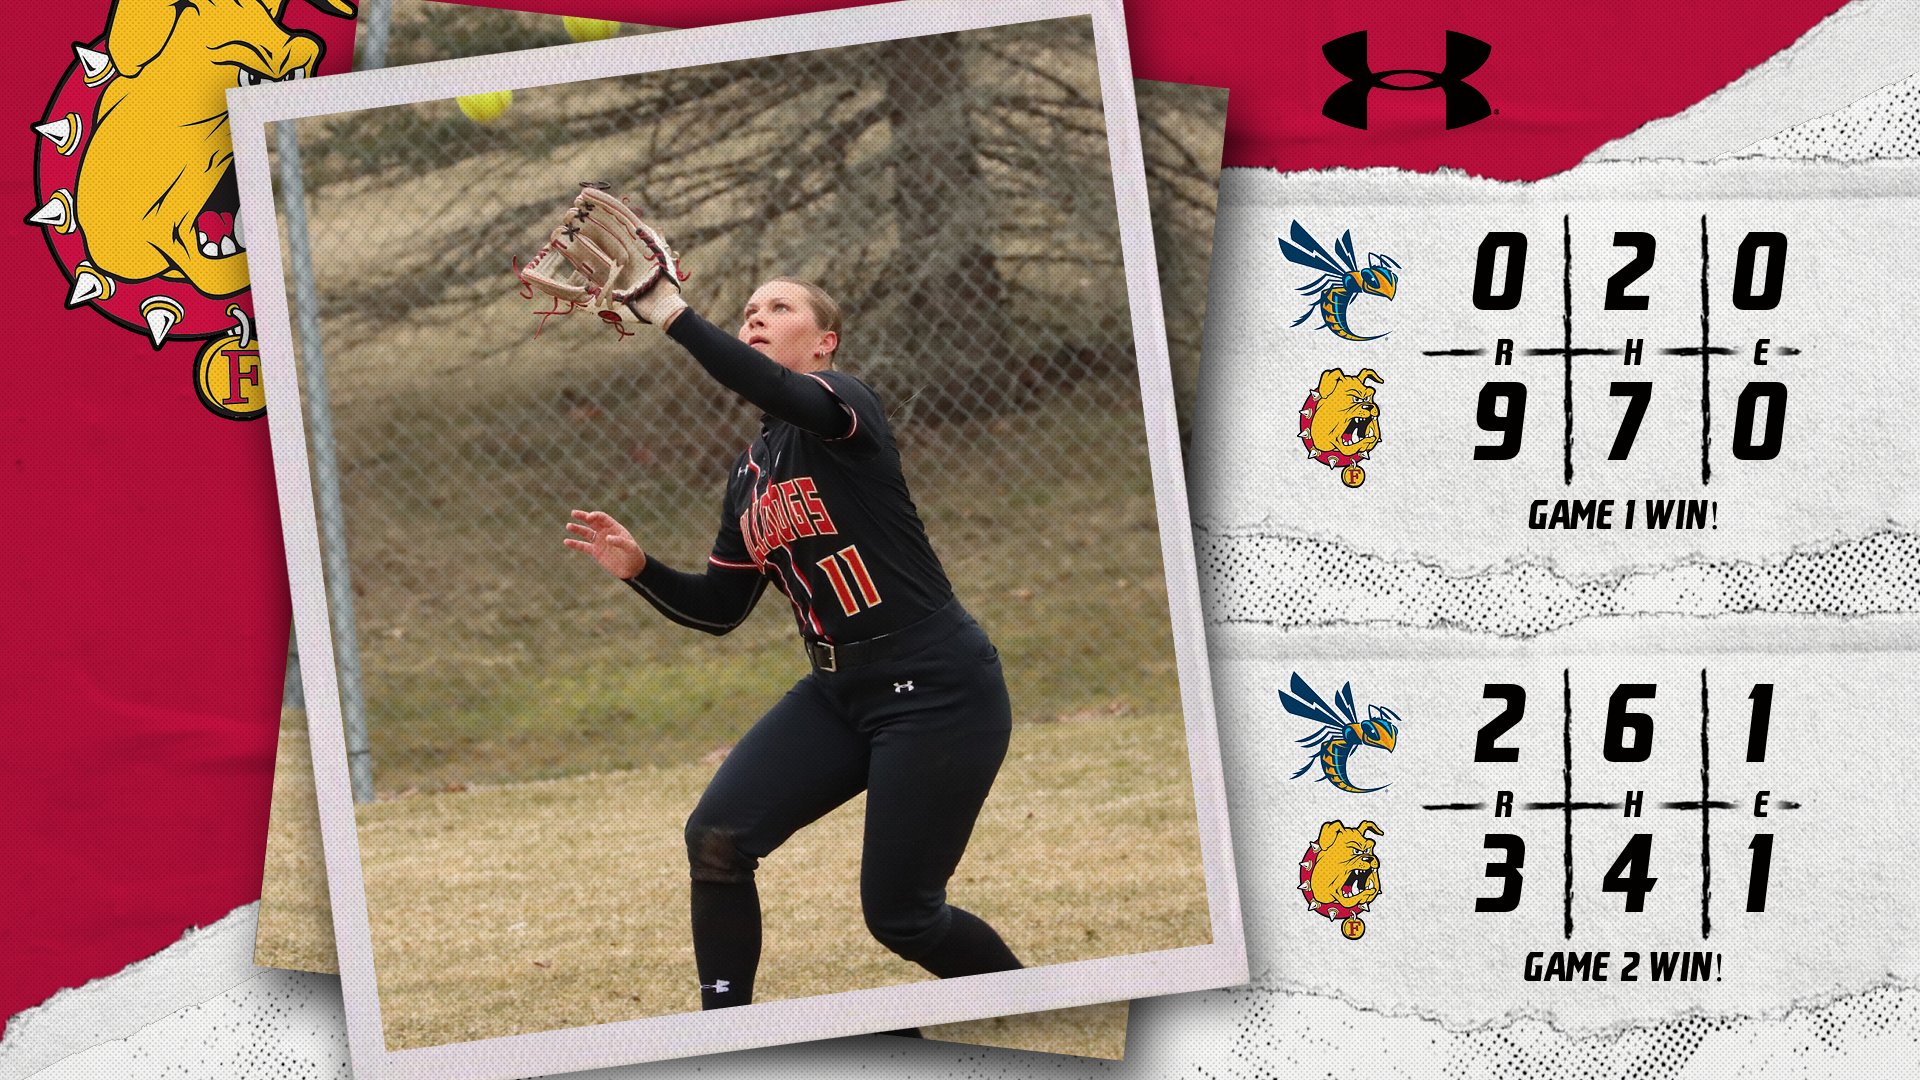 Ferris State Softball Sweeps Cedarville In Tuesday Action In Florida